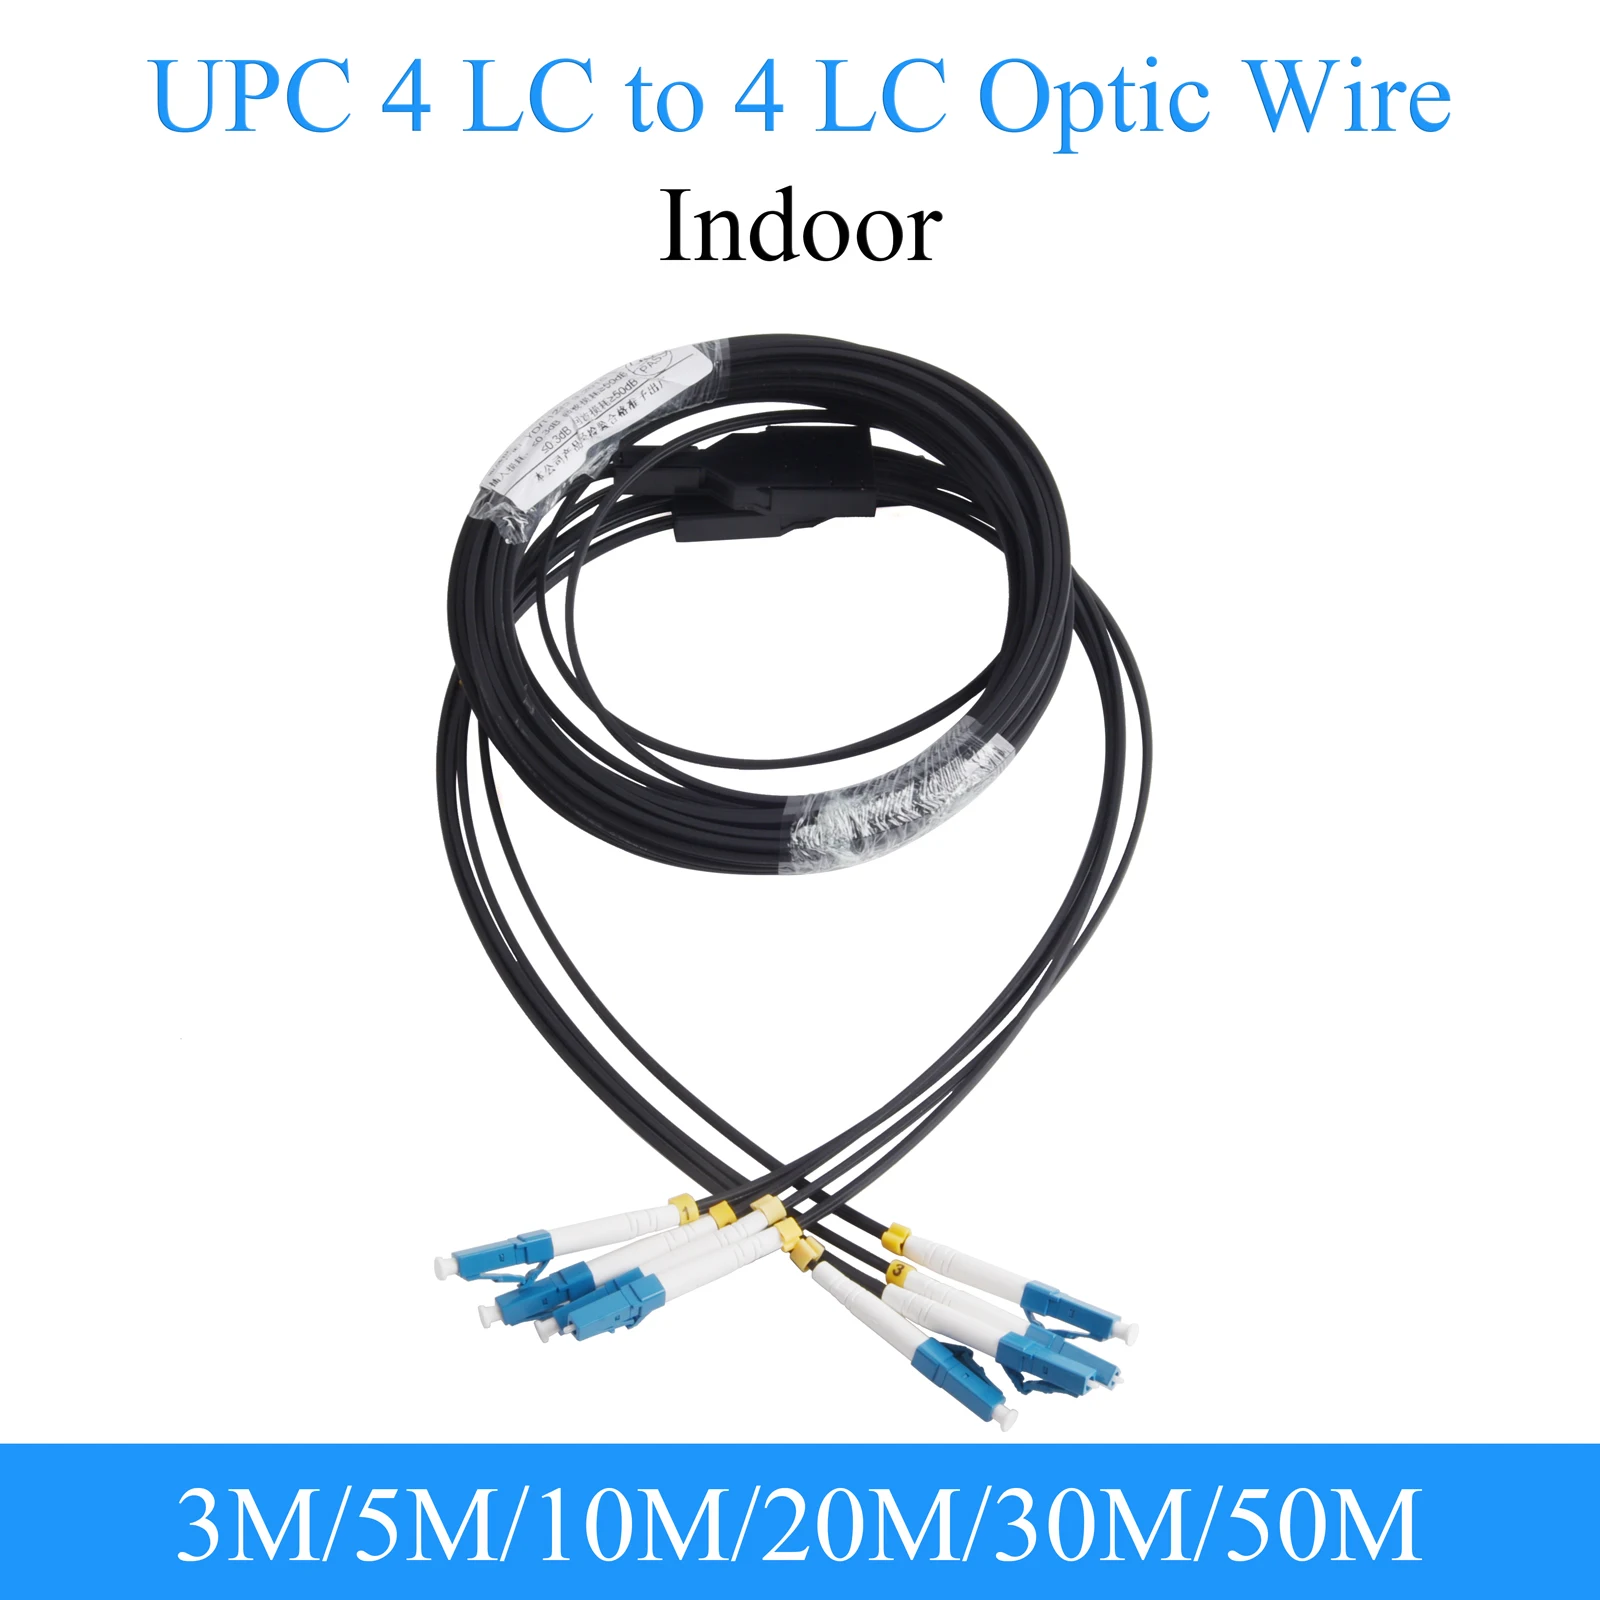 

Fiber Optic Wire UPC 4 LC to 4 LC Optical Convert Single-mode 4-core Indoor Extension Cable Patch Cord 3M/5M/10M/20M/30M/50M